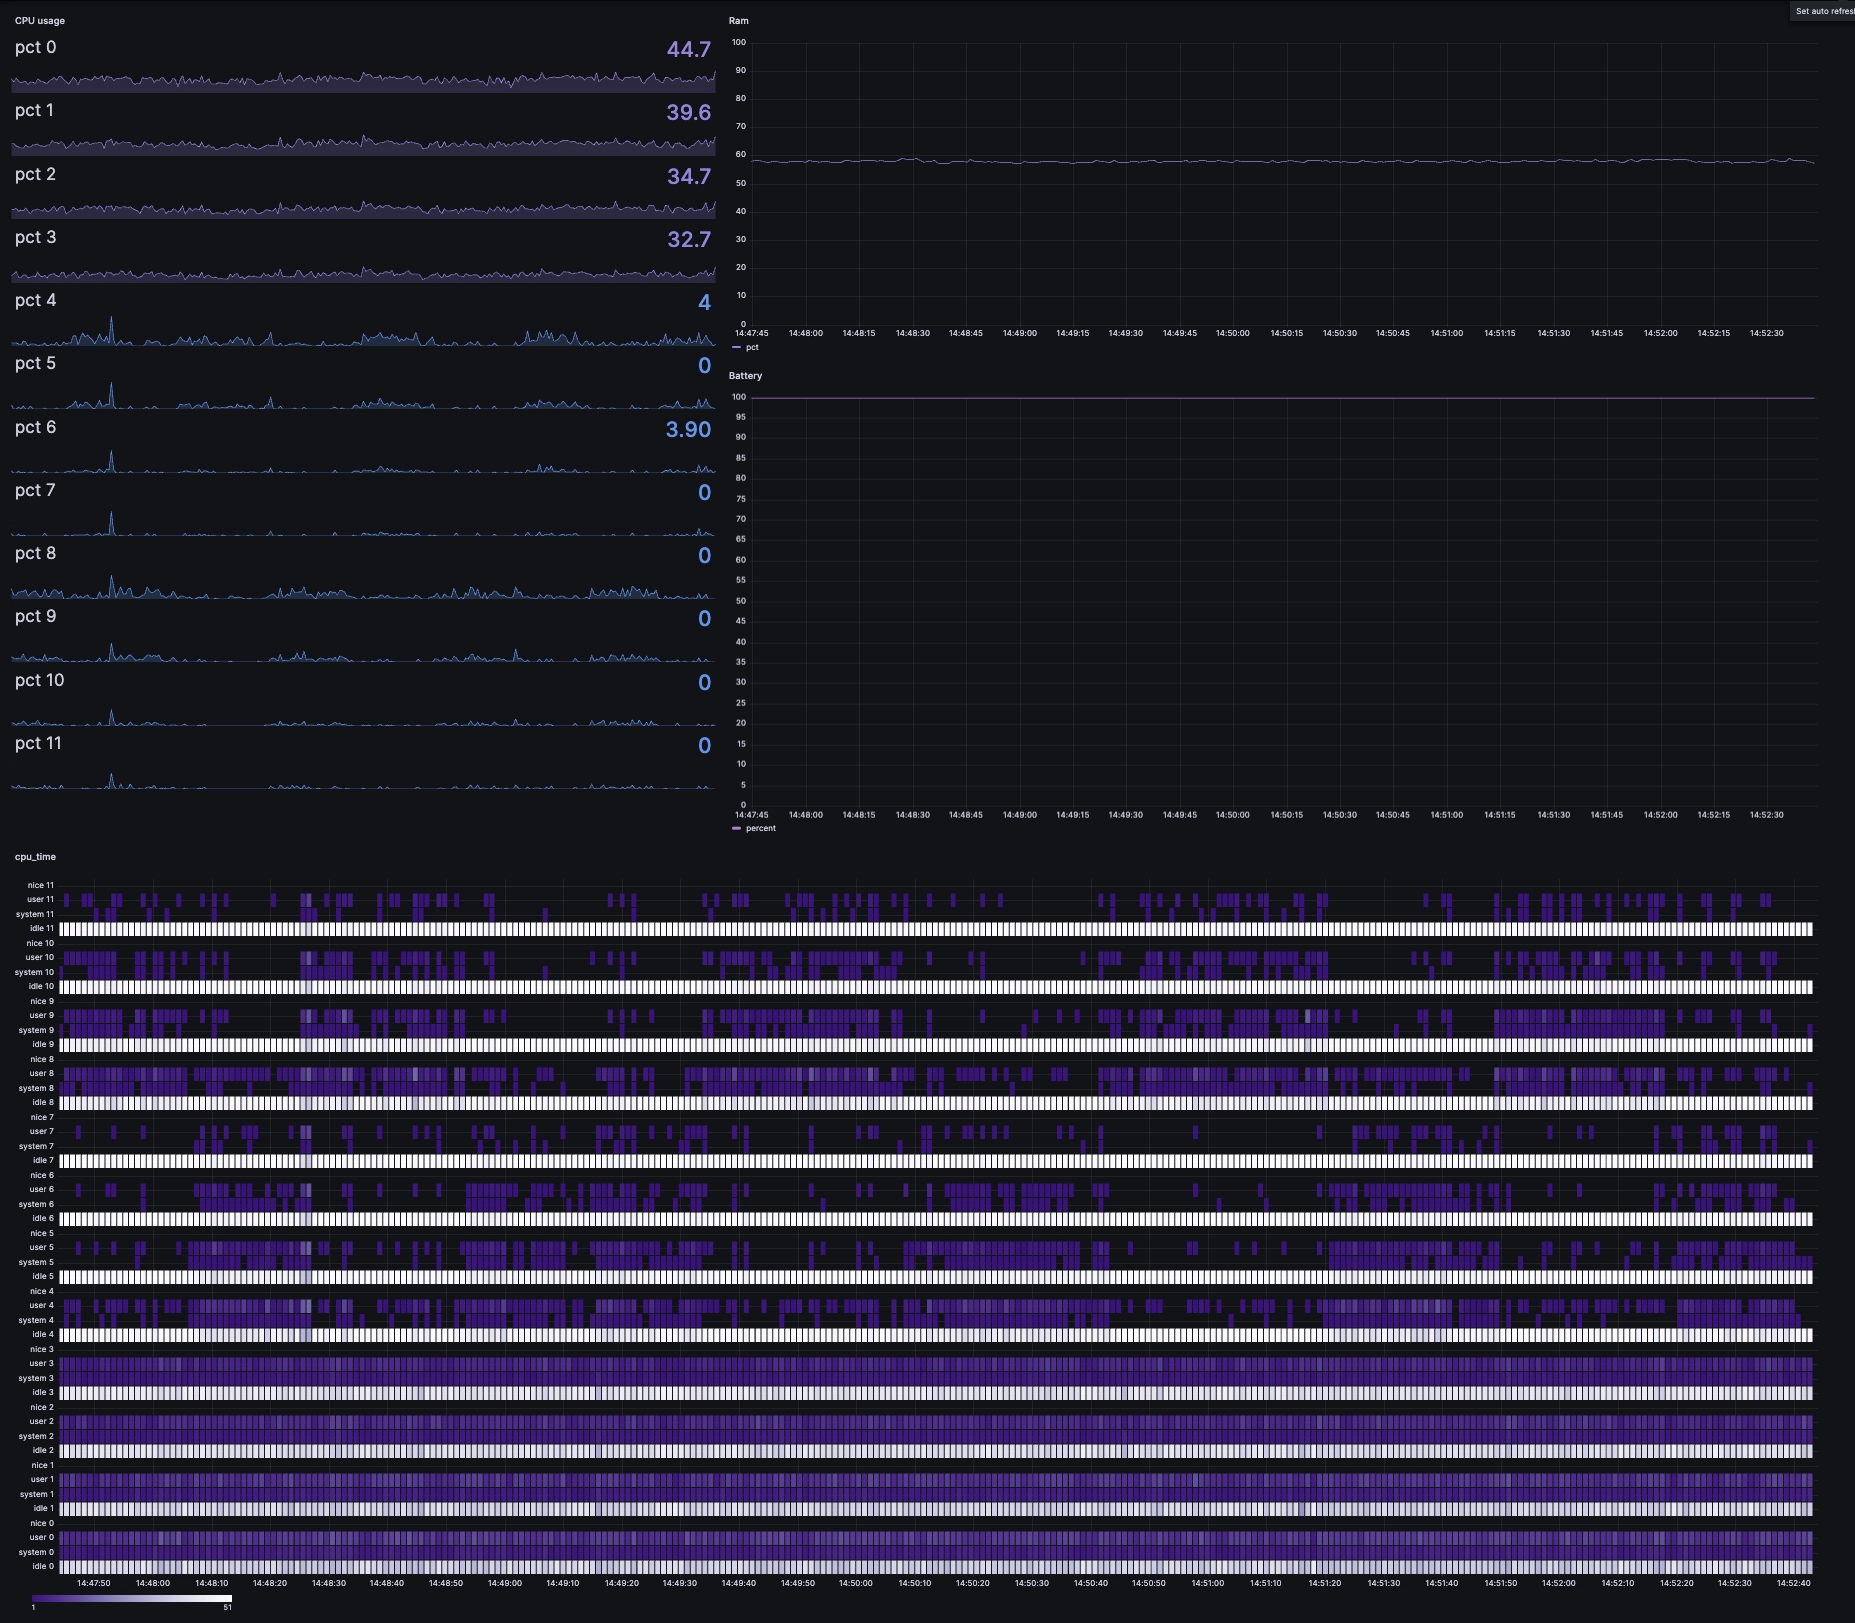 Graphs showing multiple resource data points in Grafana